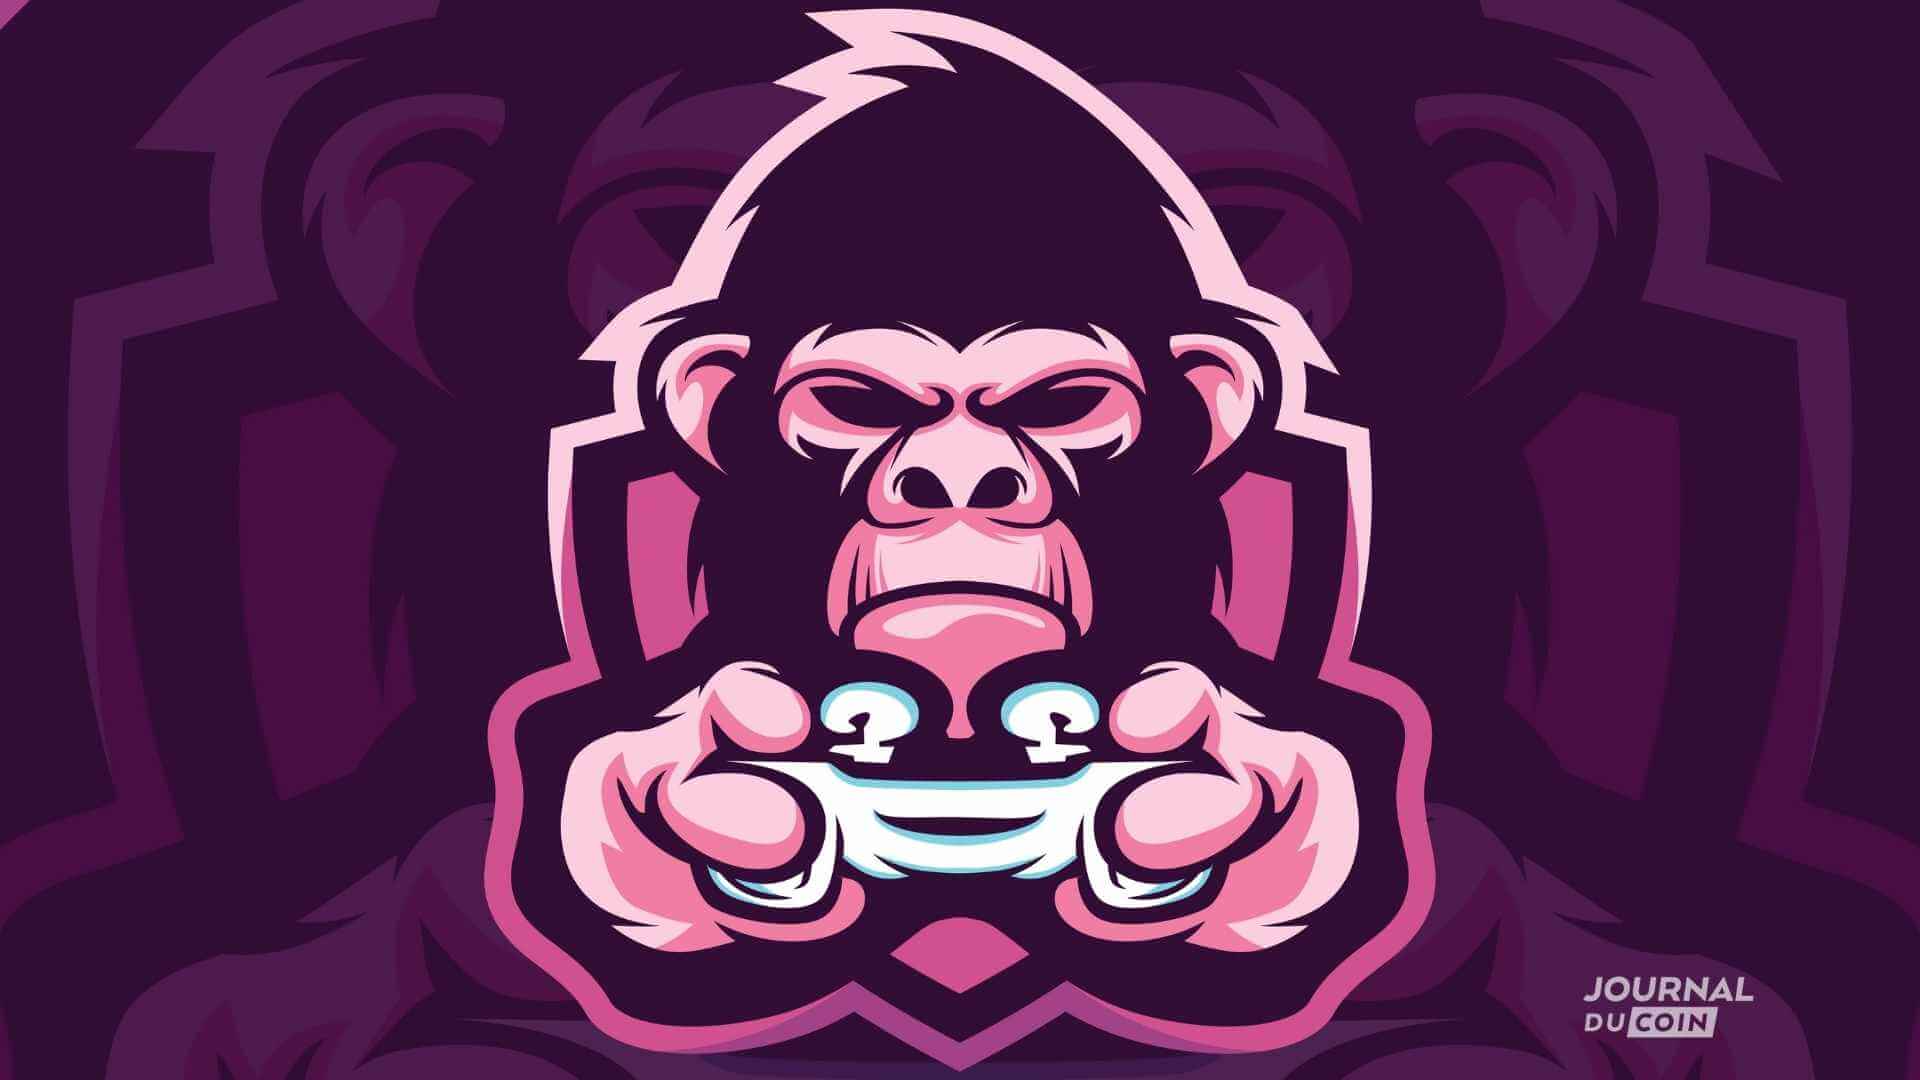 Animoca Brands is developing a play-to-earn game at Bored Apes Yatch Club NFT.